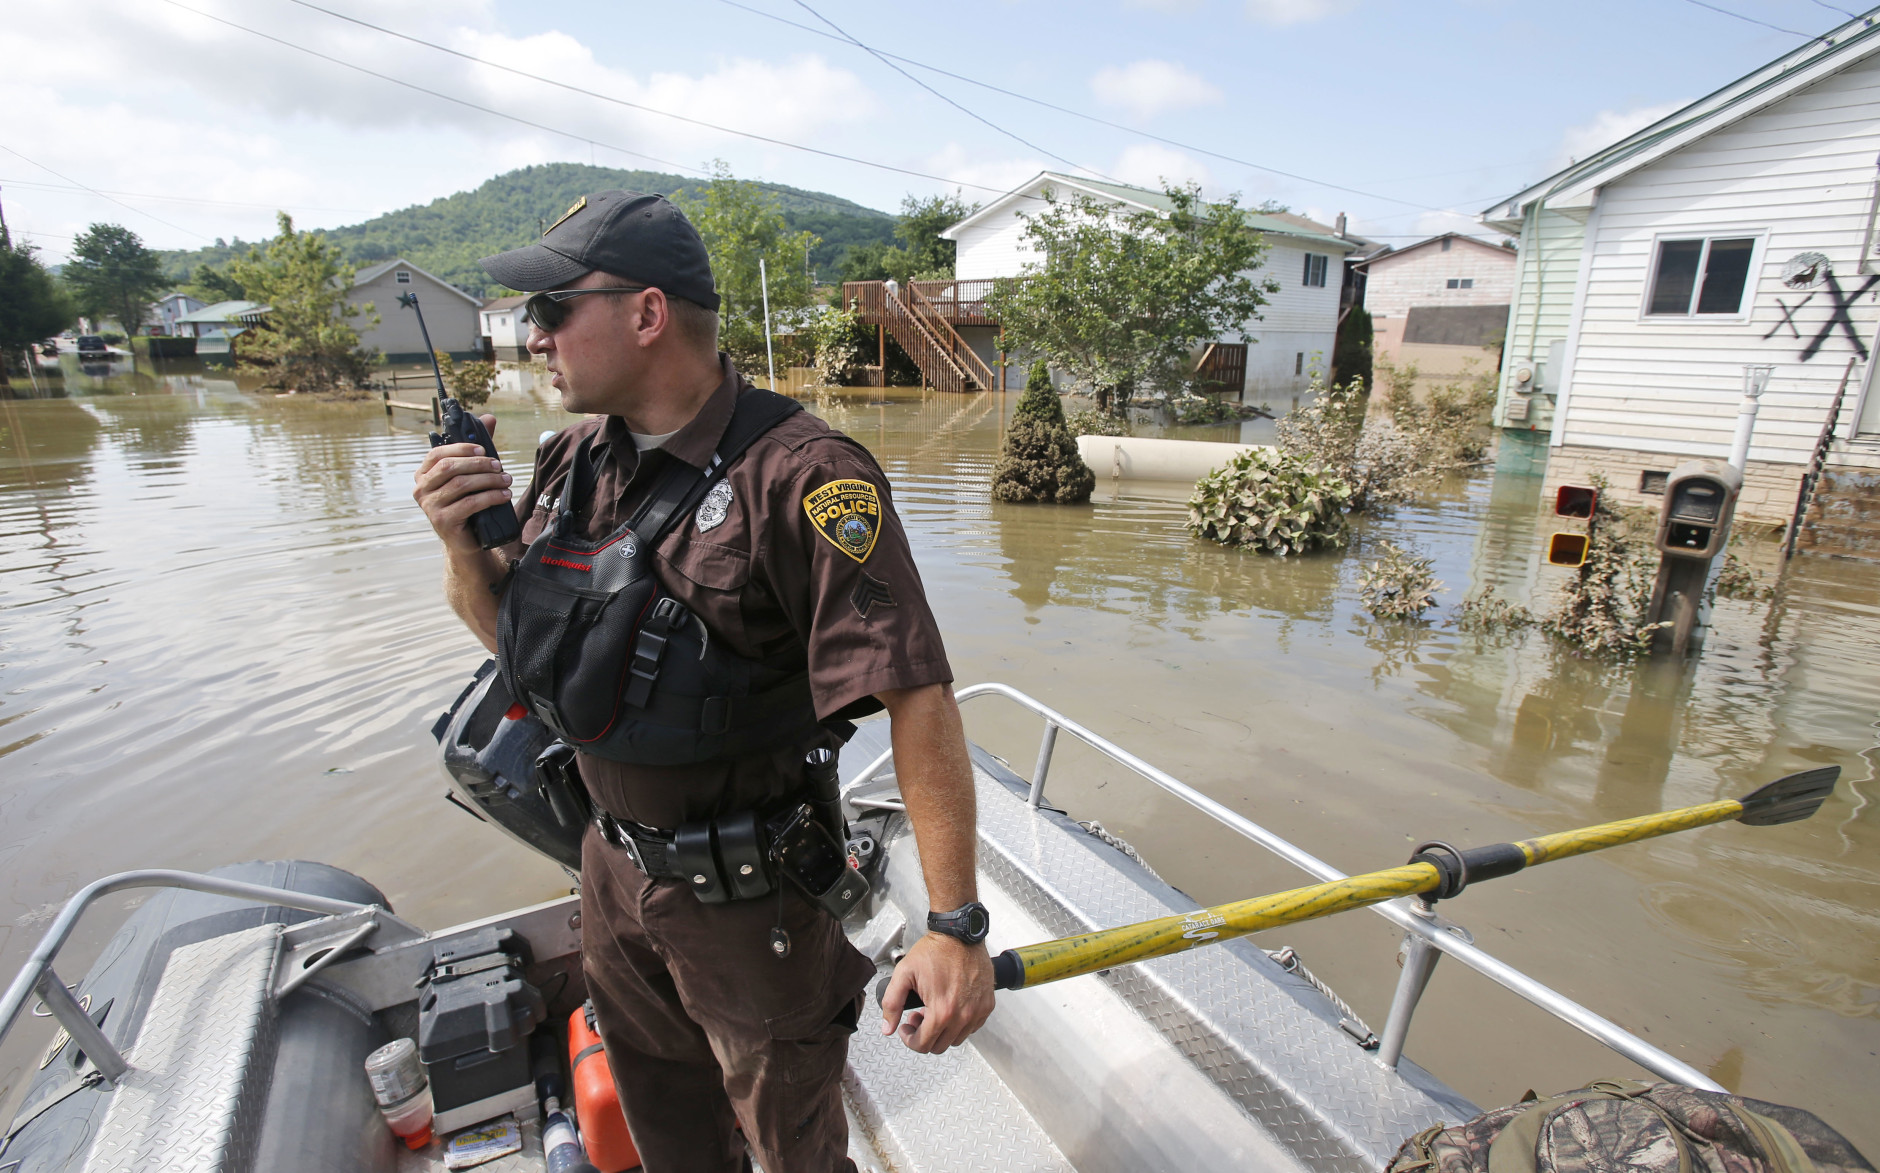 Lt. Dennis Feazell, of the West Virginia Department of Natural Resources, contacts his command center as he and a co-worker search flooded homes in Rainelle, W. Va., Saturday, June 25, 2016. Heavy rains that pummeled West Virginia left multiple people dead, and authorities said Saturday that an unknown number of people in the hardest-hit county remained unaccounted for.  (AP Photo/Steve Helber)